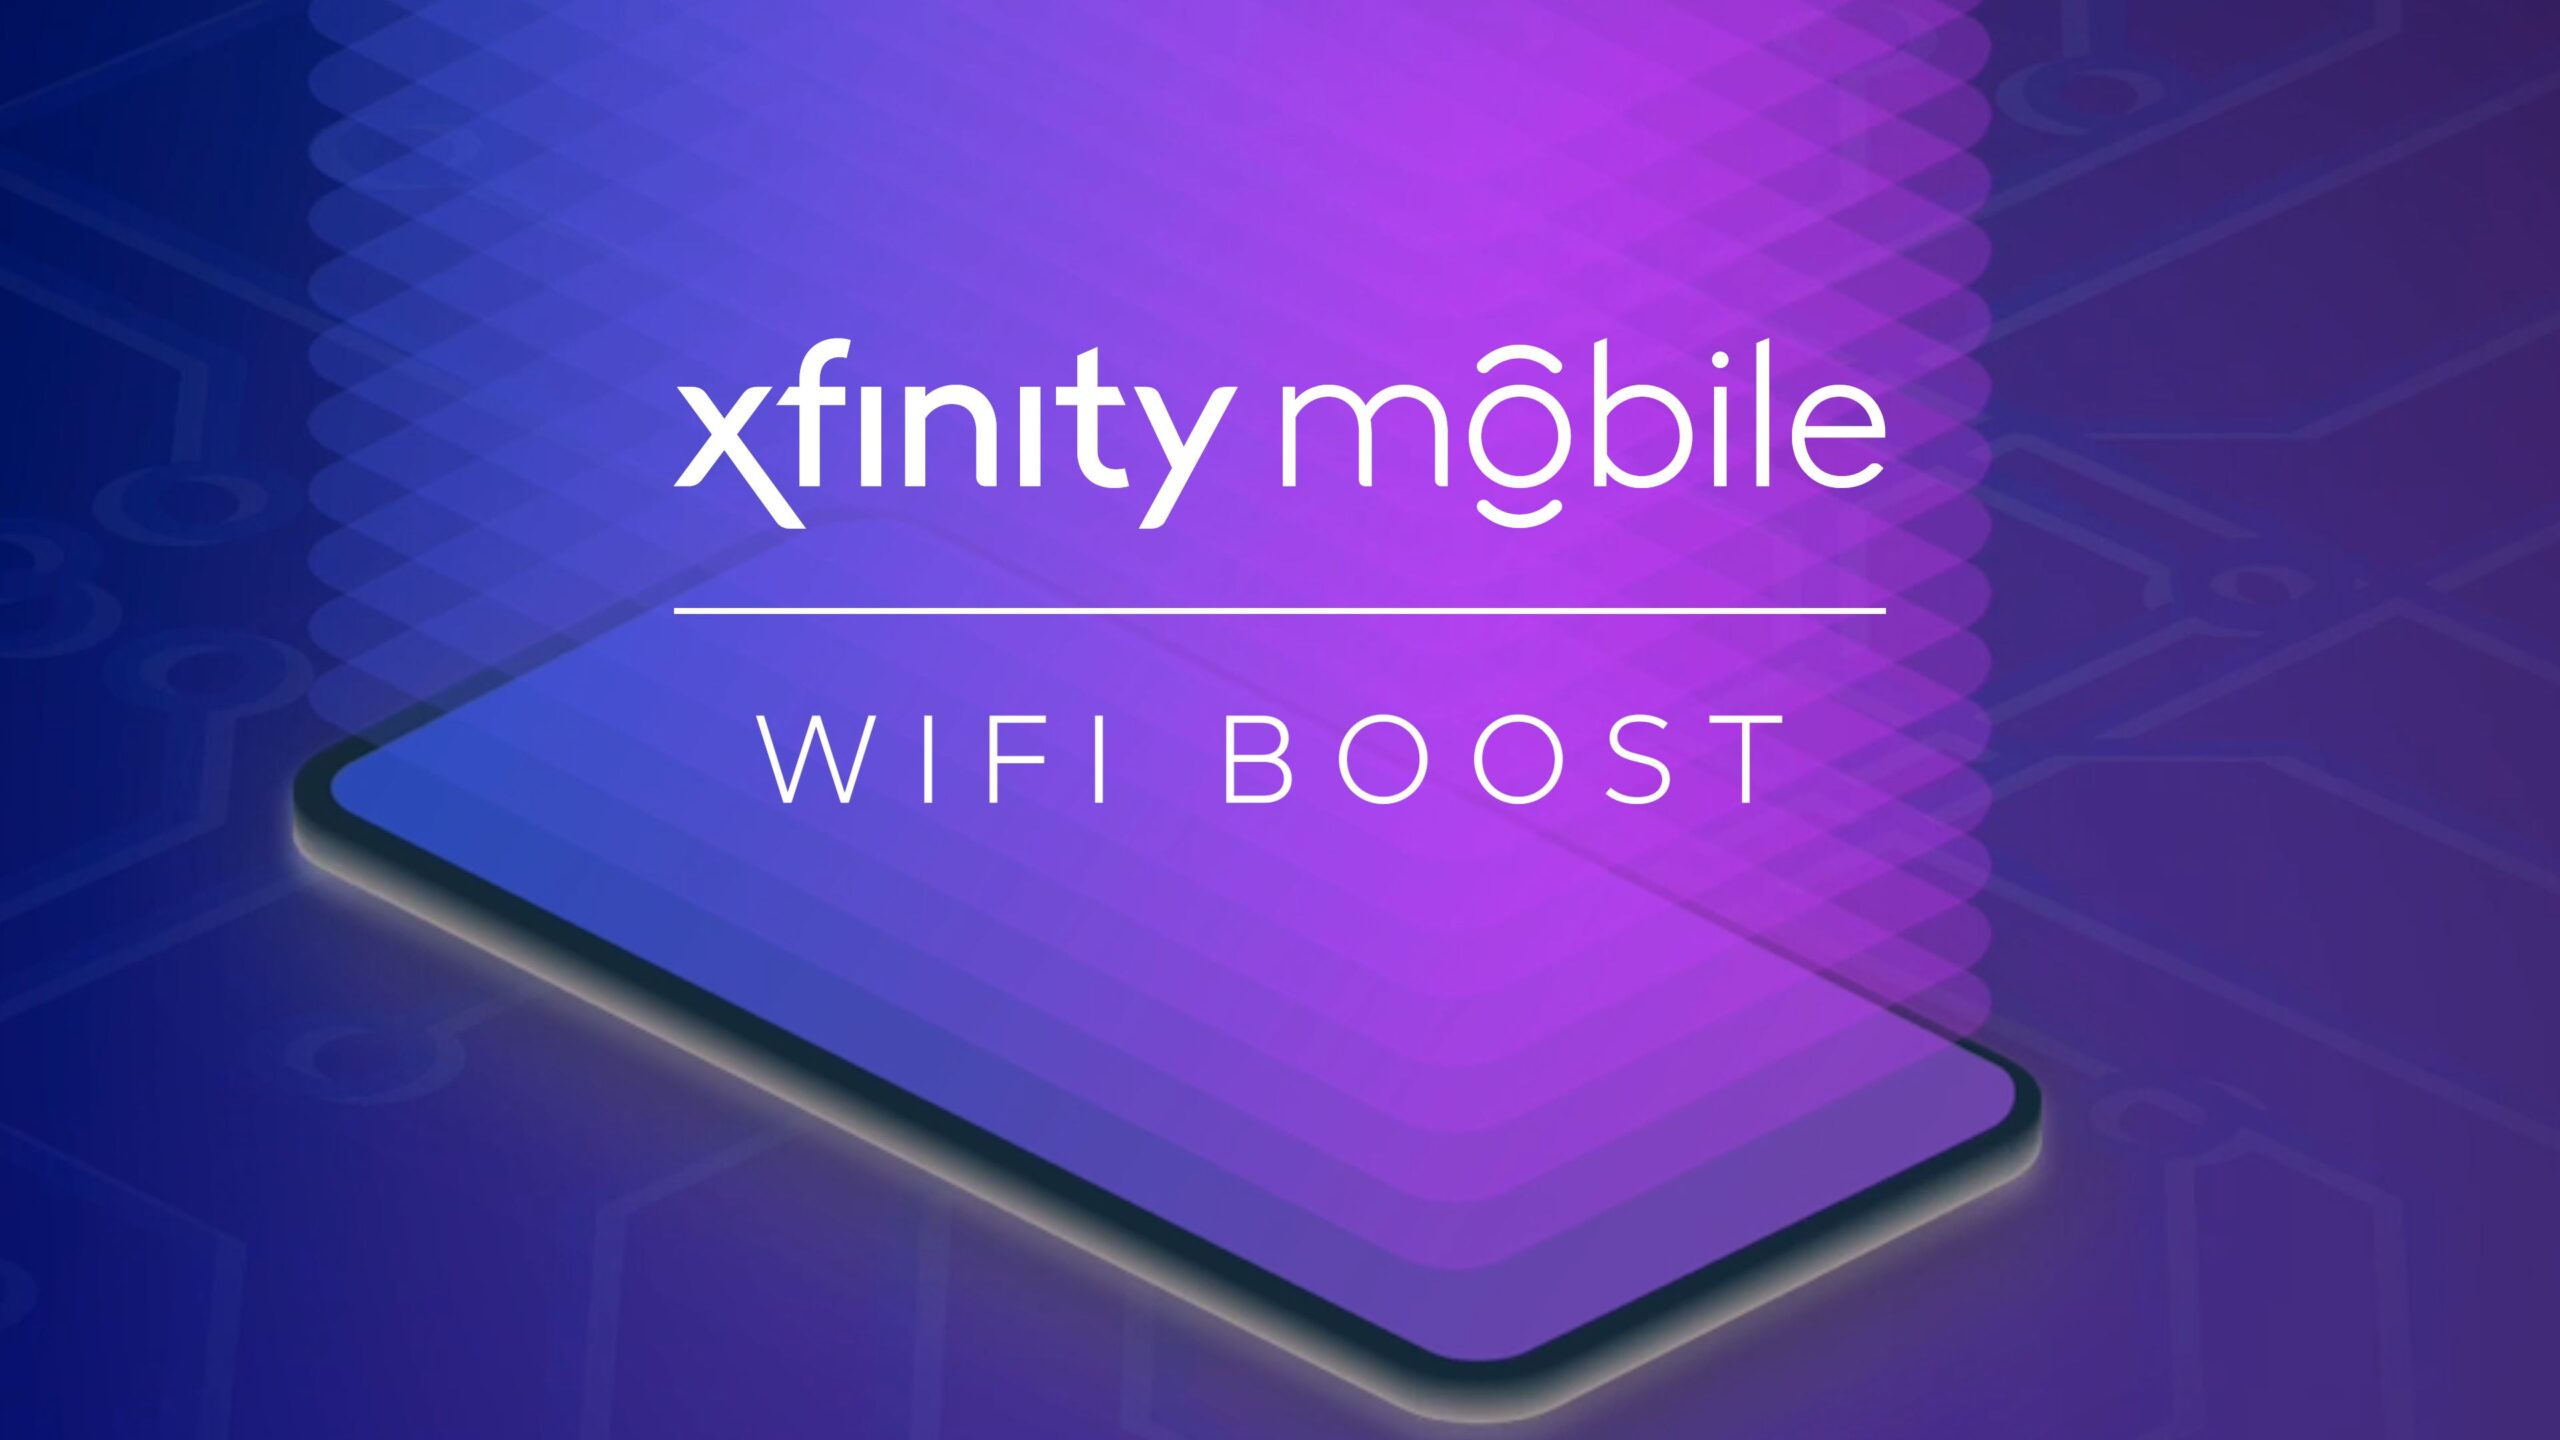 Thousands of Xfinity Mobile Customers in the Midwest Region Receive Gig Speeds at No Additional Cost